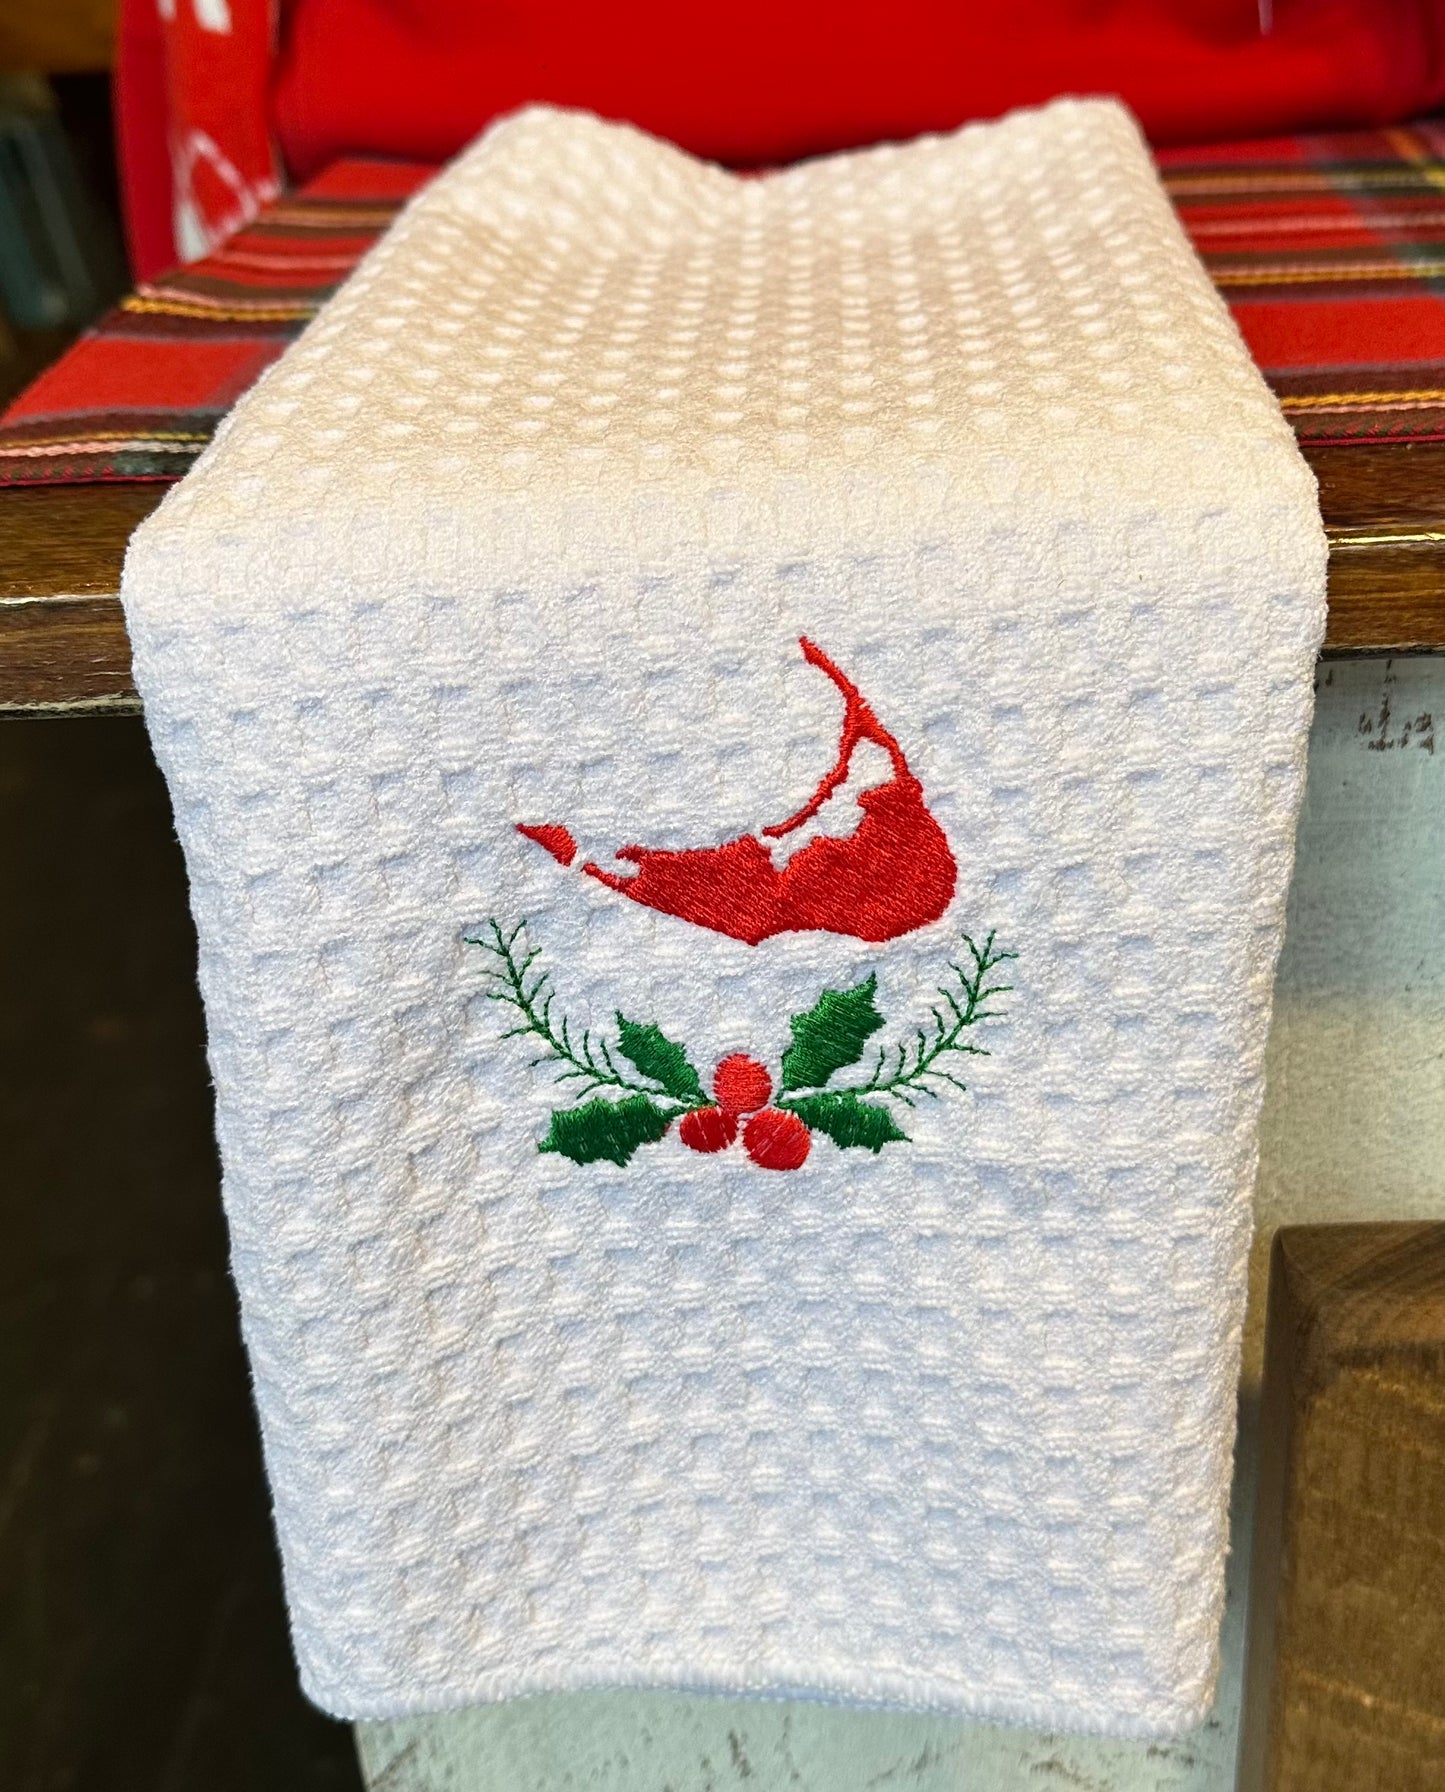 Nantucket Red Holly Christmas Towel